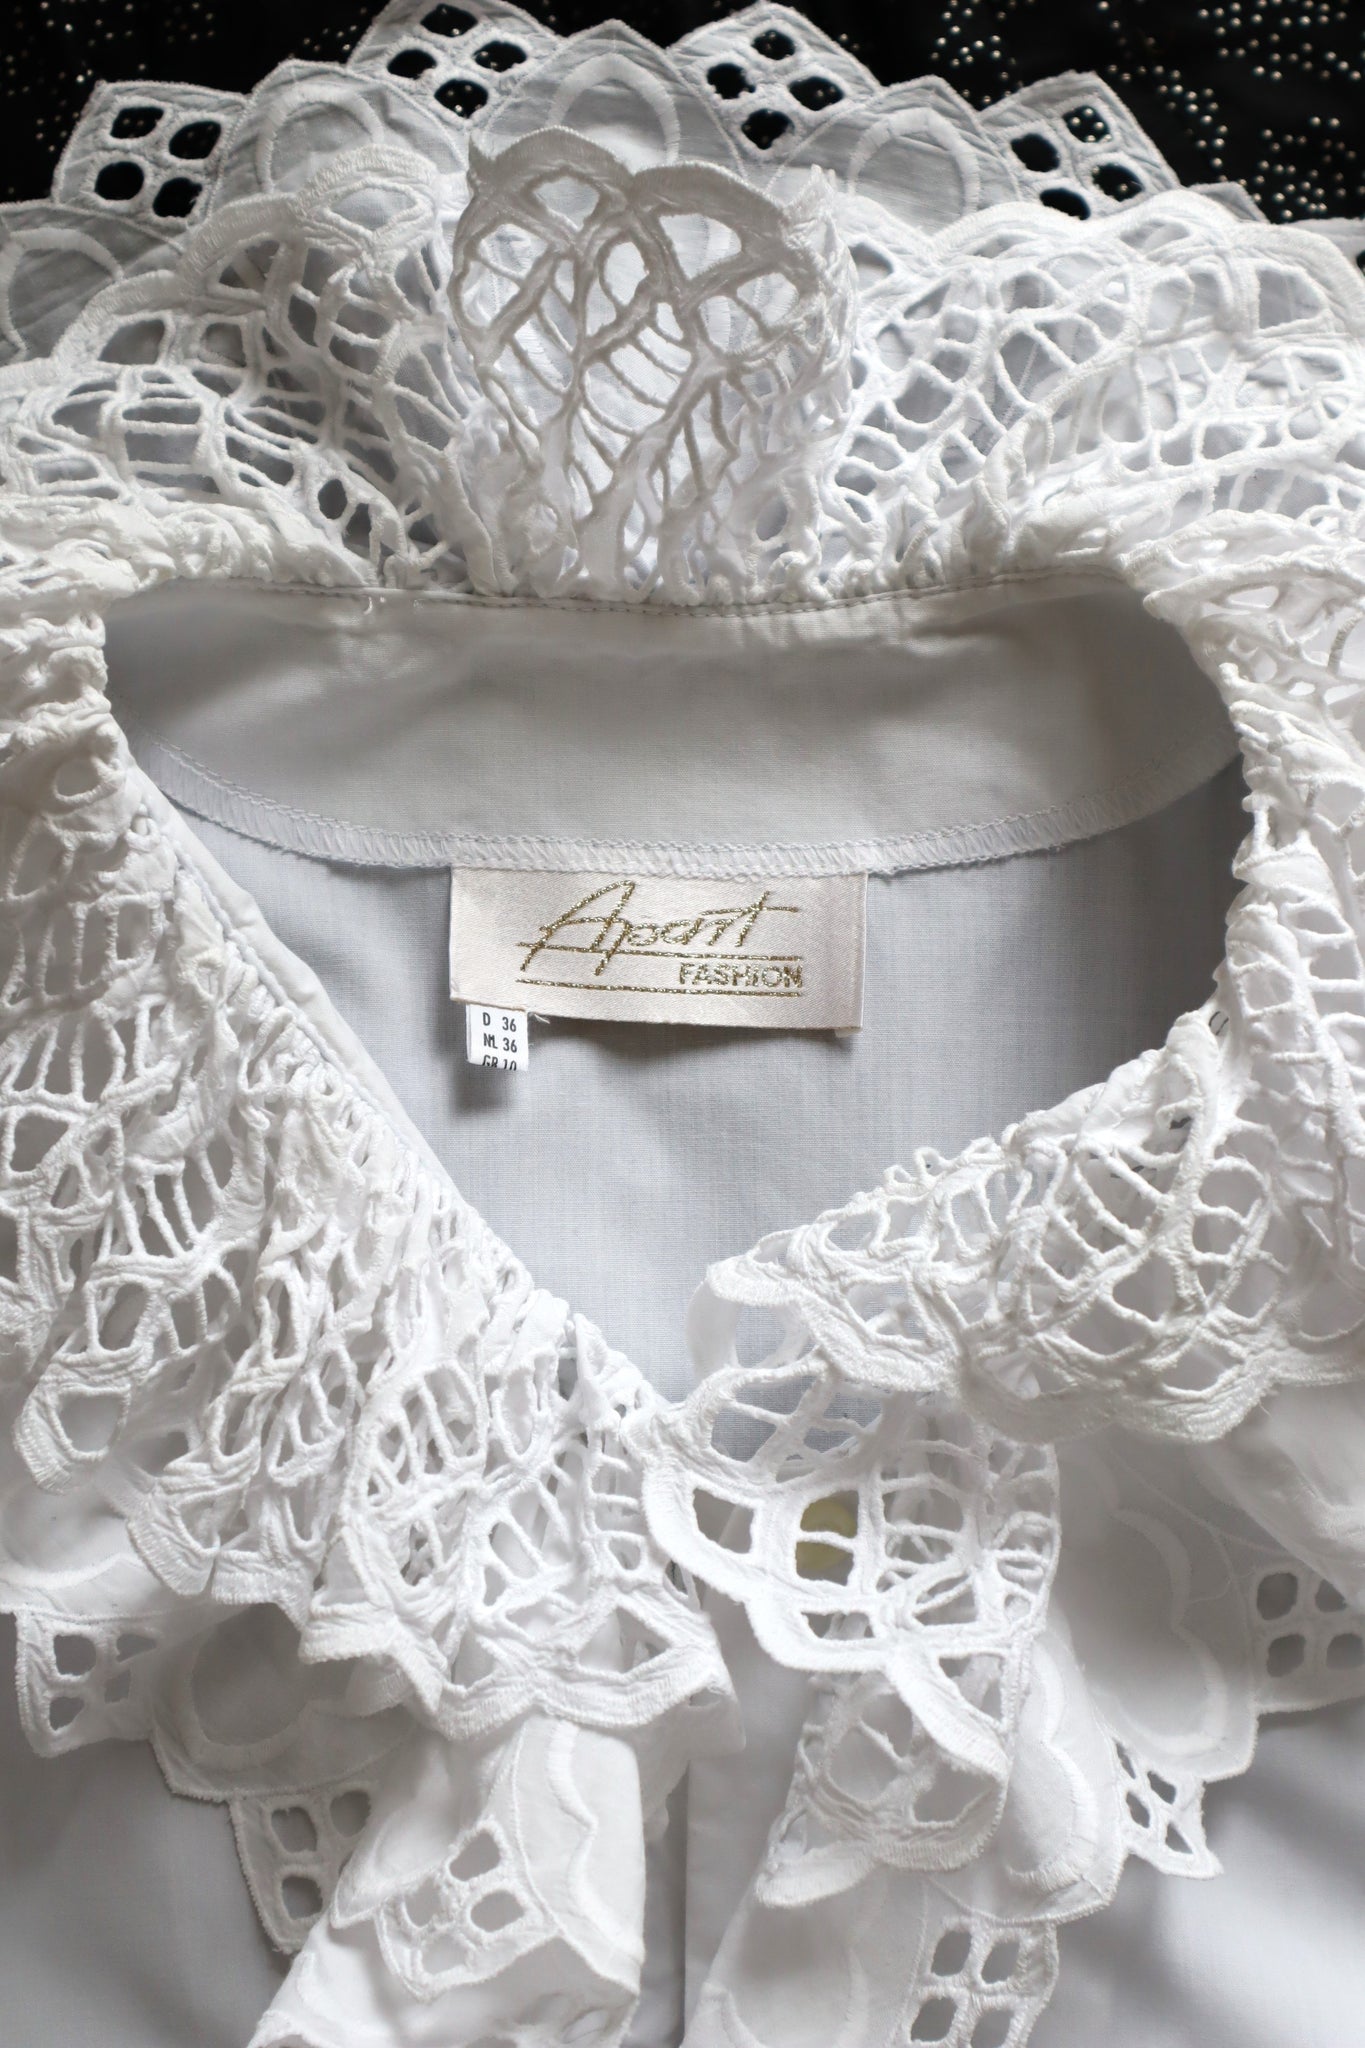 80s Cutwork Lace Puff Sleeve Blouse